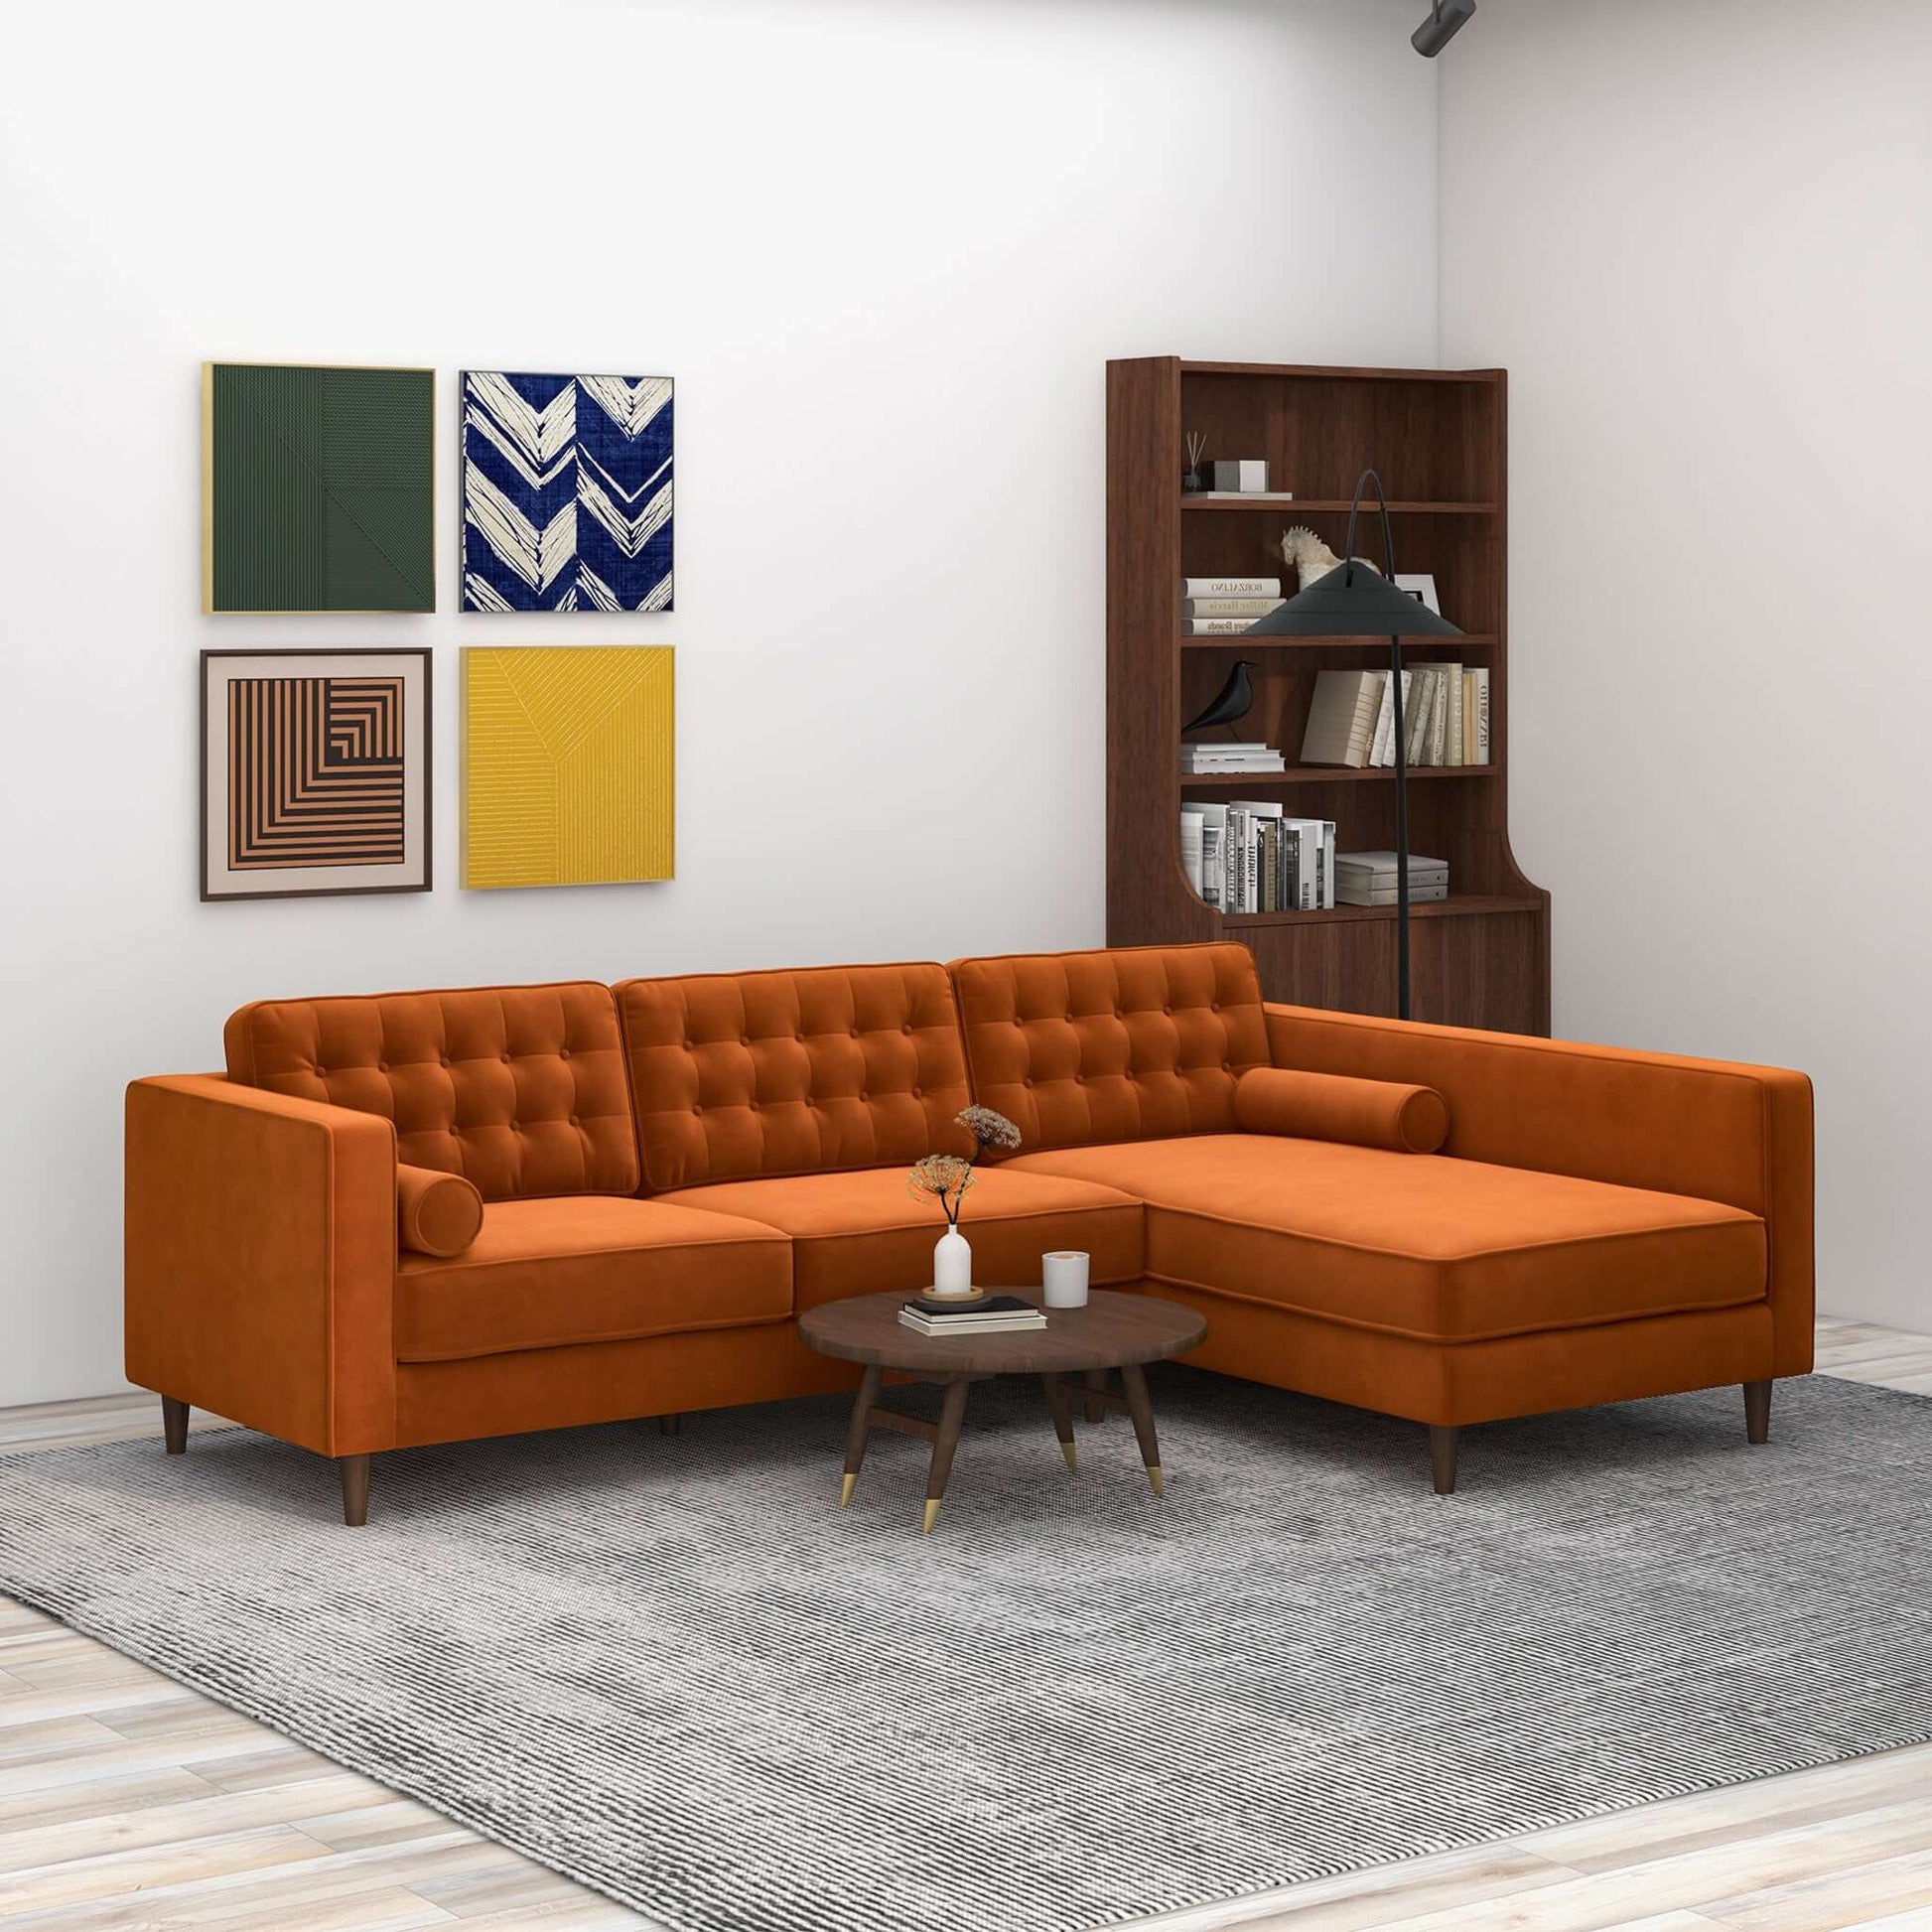 Christian Burnt Orange Sectional Couch